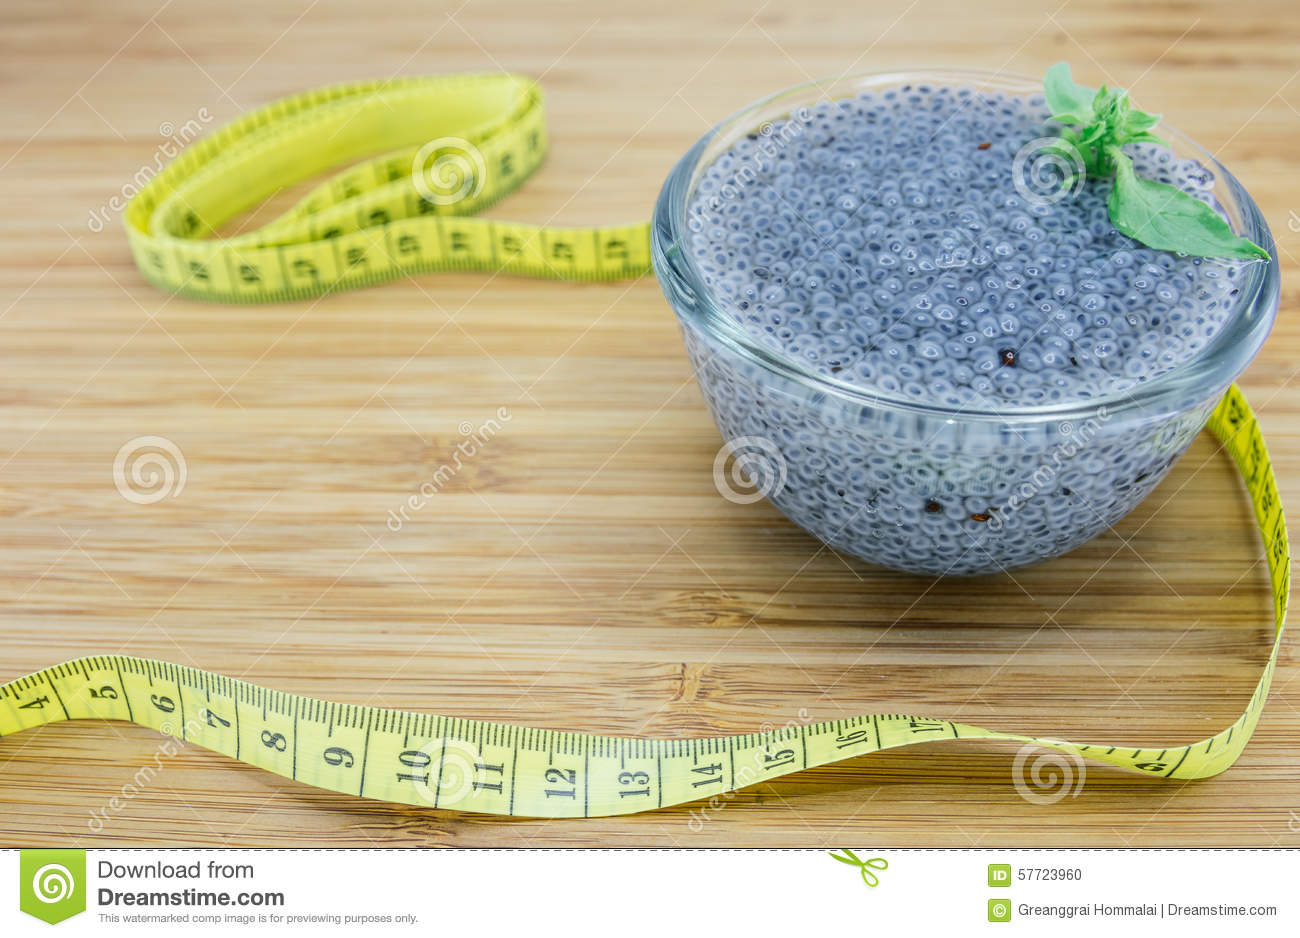 Basil Seeds In A Glass Bowl And Measuring Tape On Wood Background